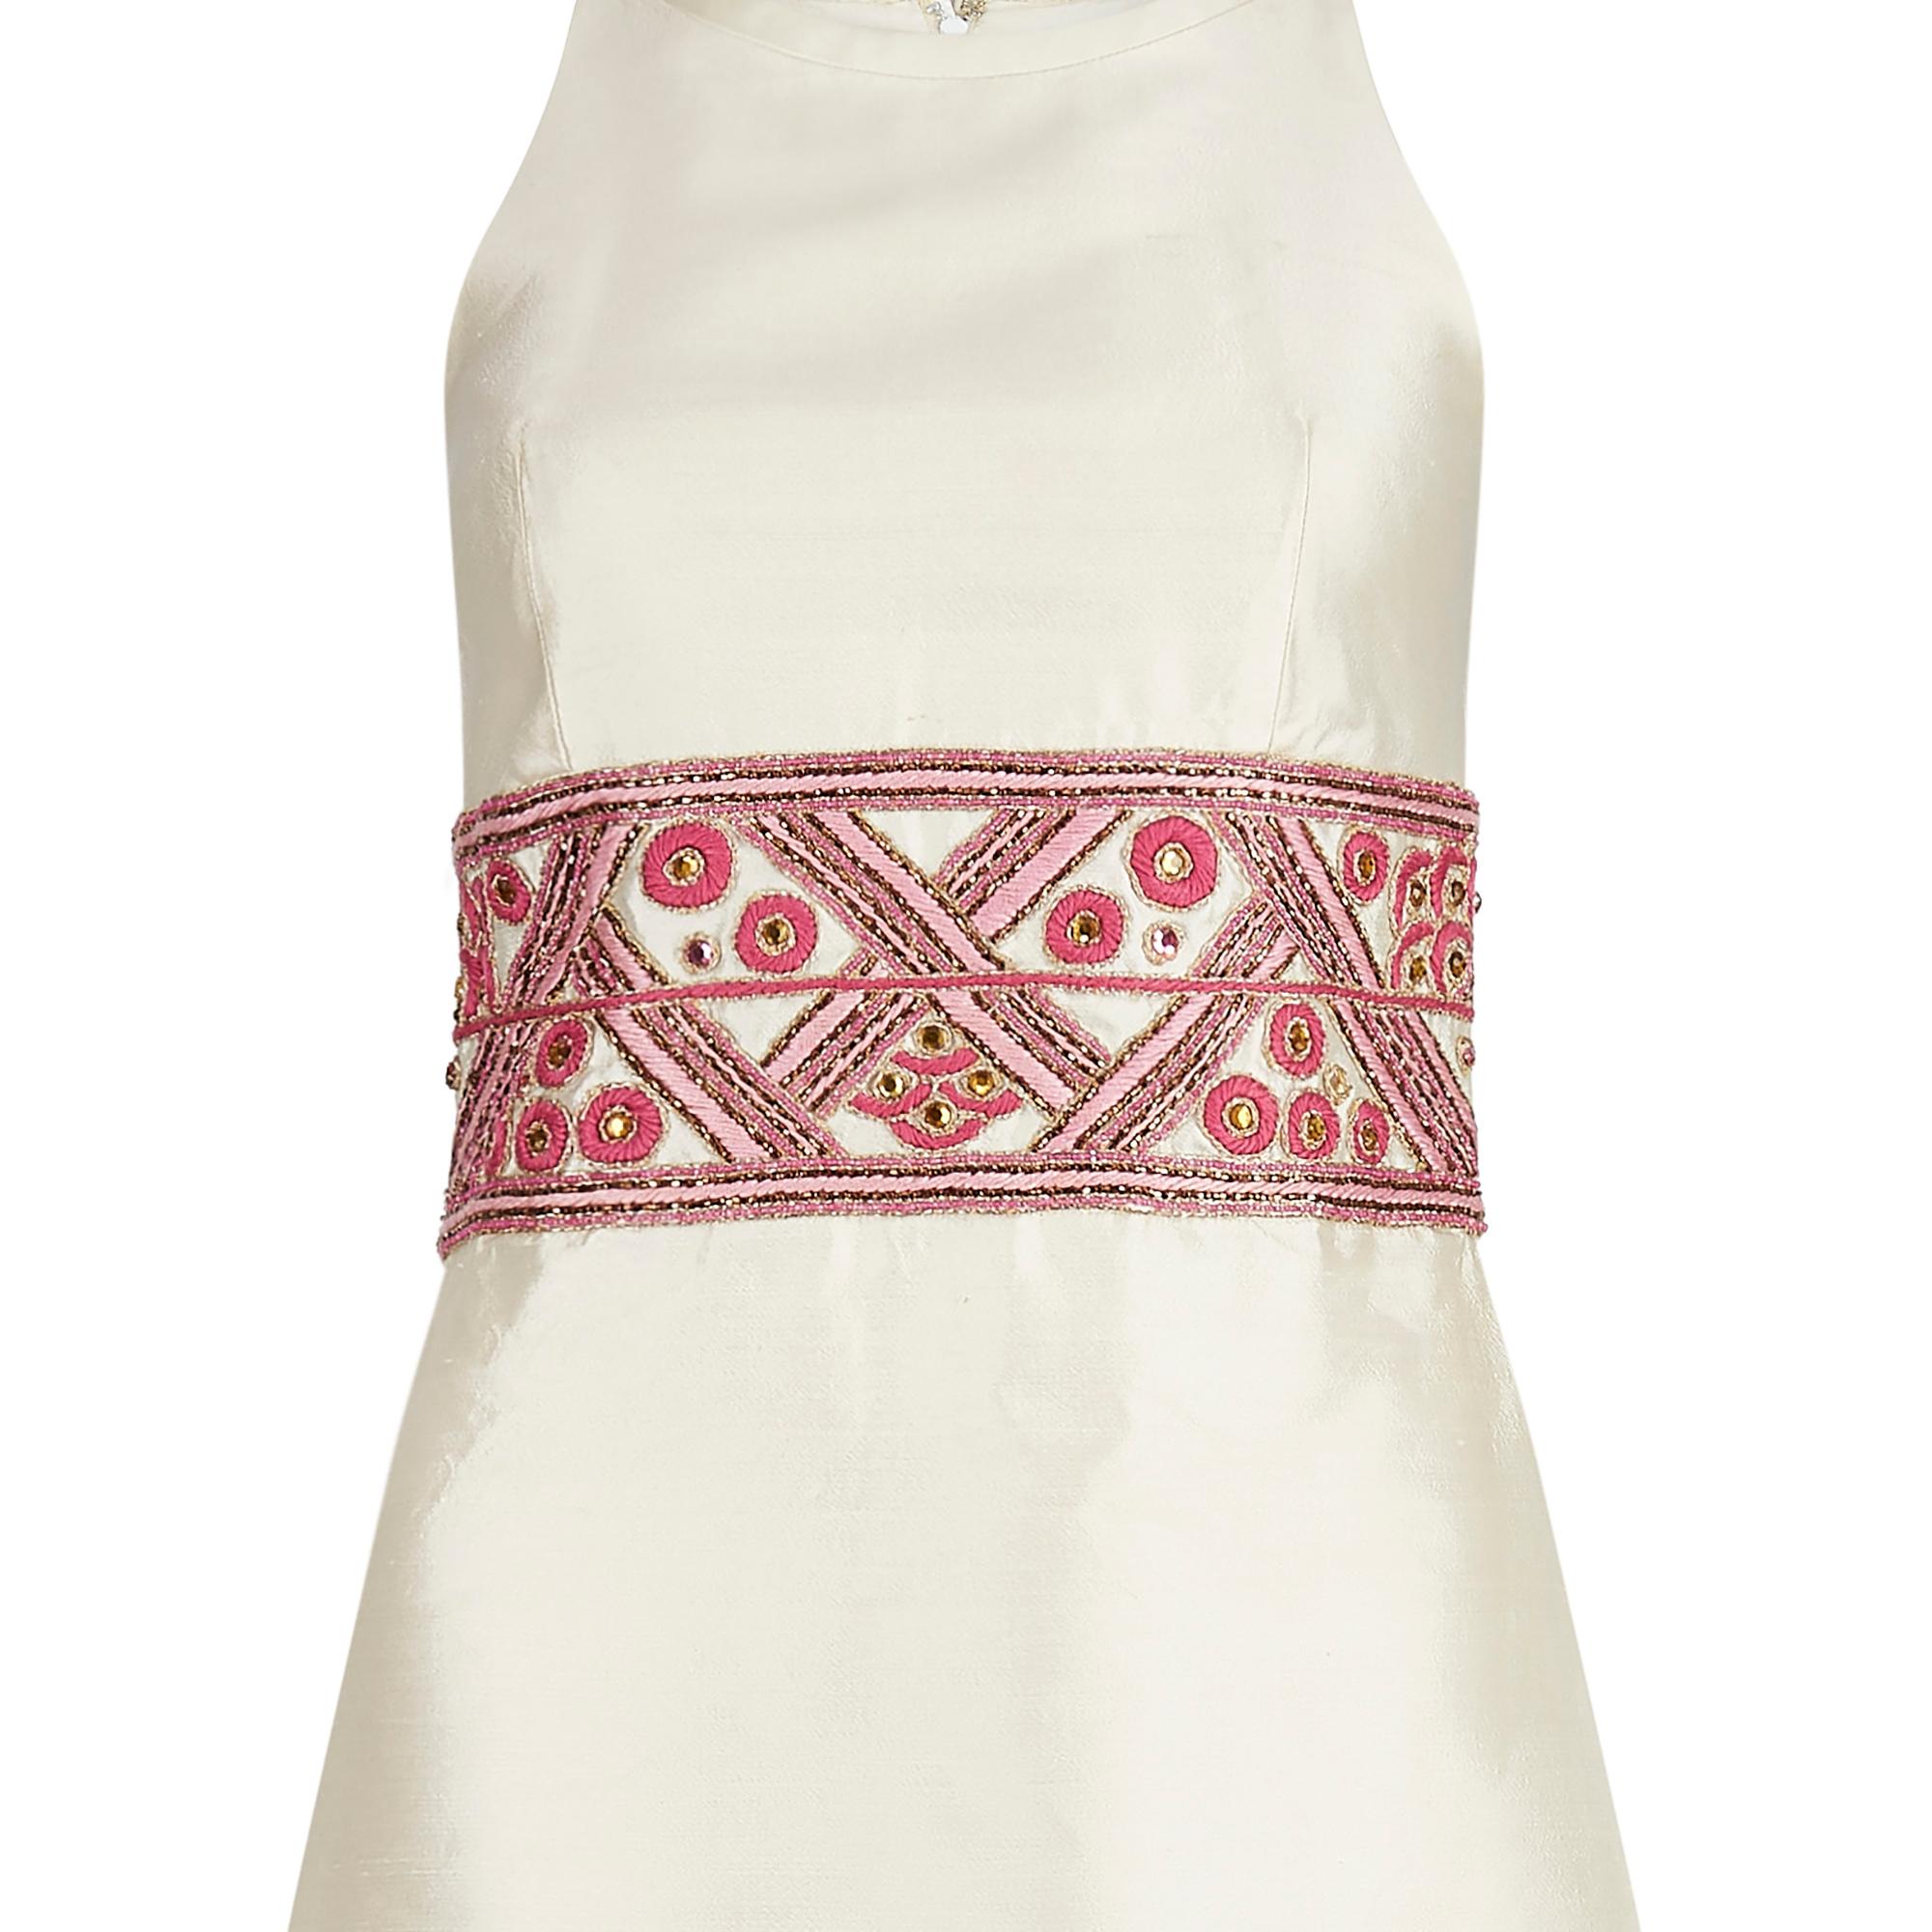 White 1960s Contessa Cream Silk Dress with Pink Embellished Waistband For Sale